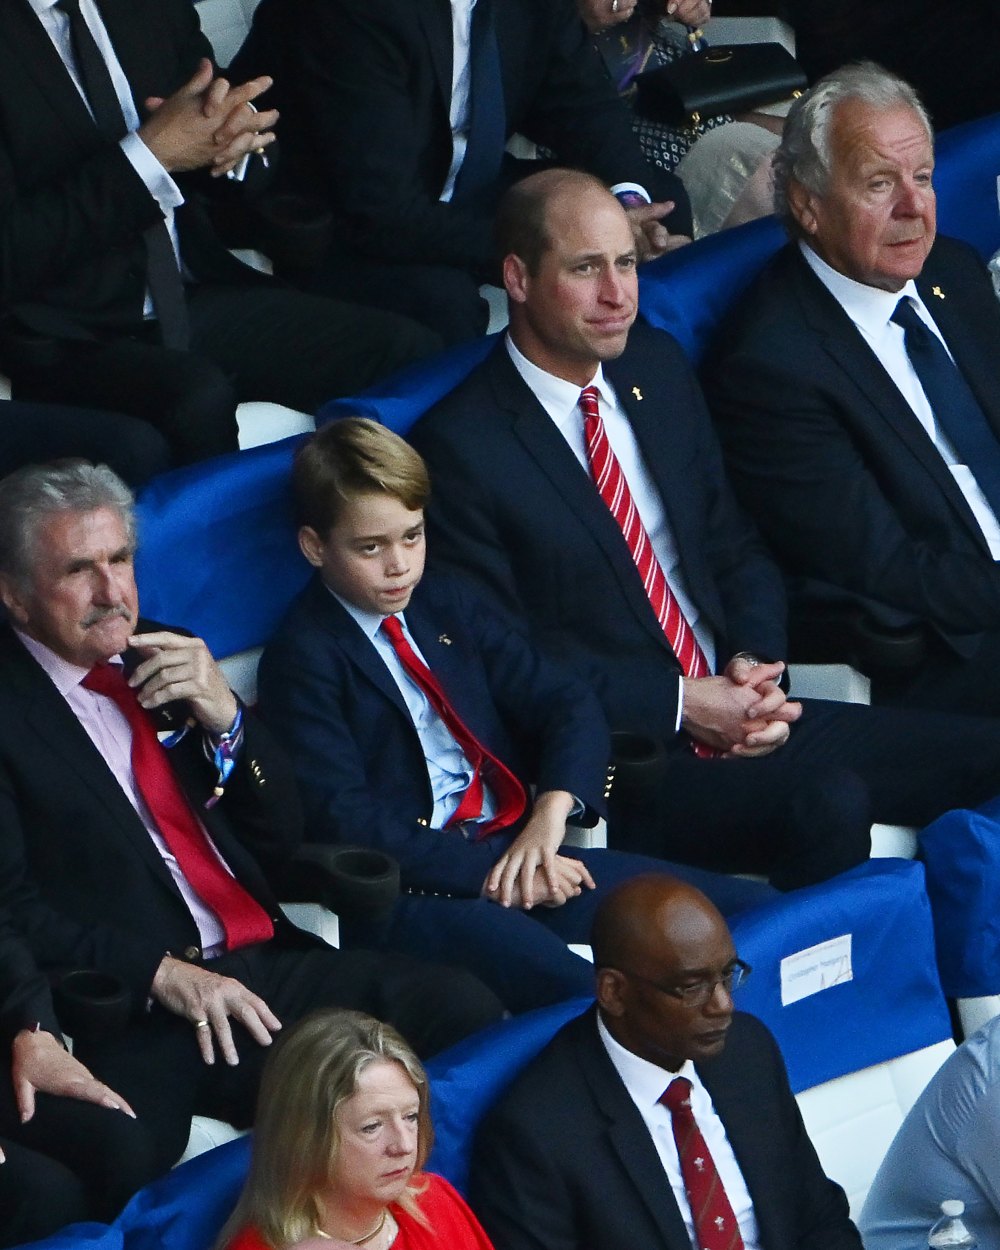 Prince William and Prince George Are Twinning in Red Ties at Rugby World Cup